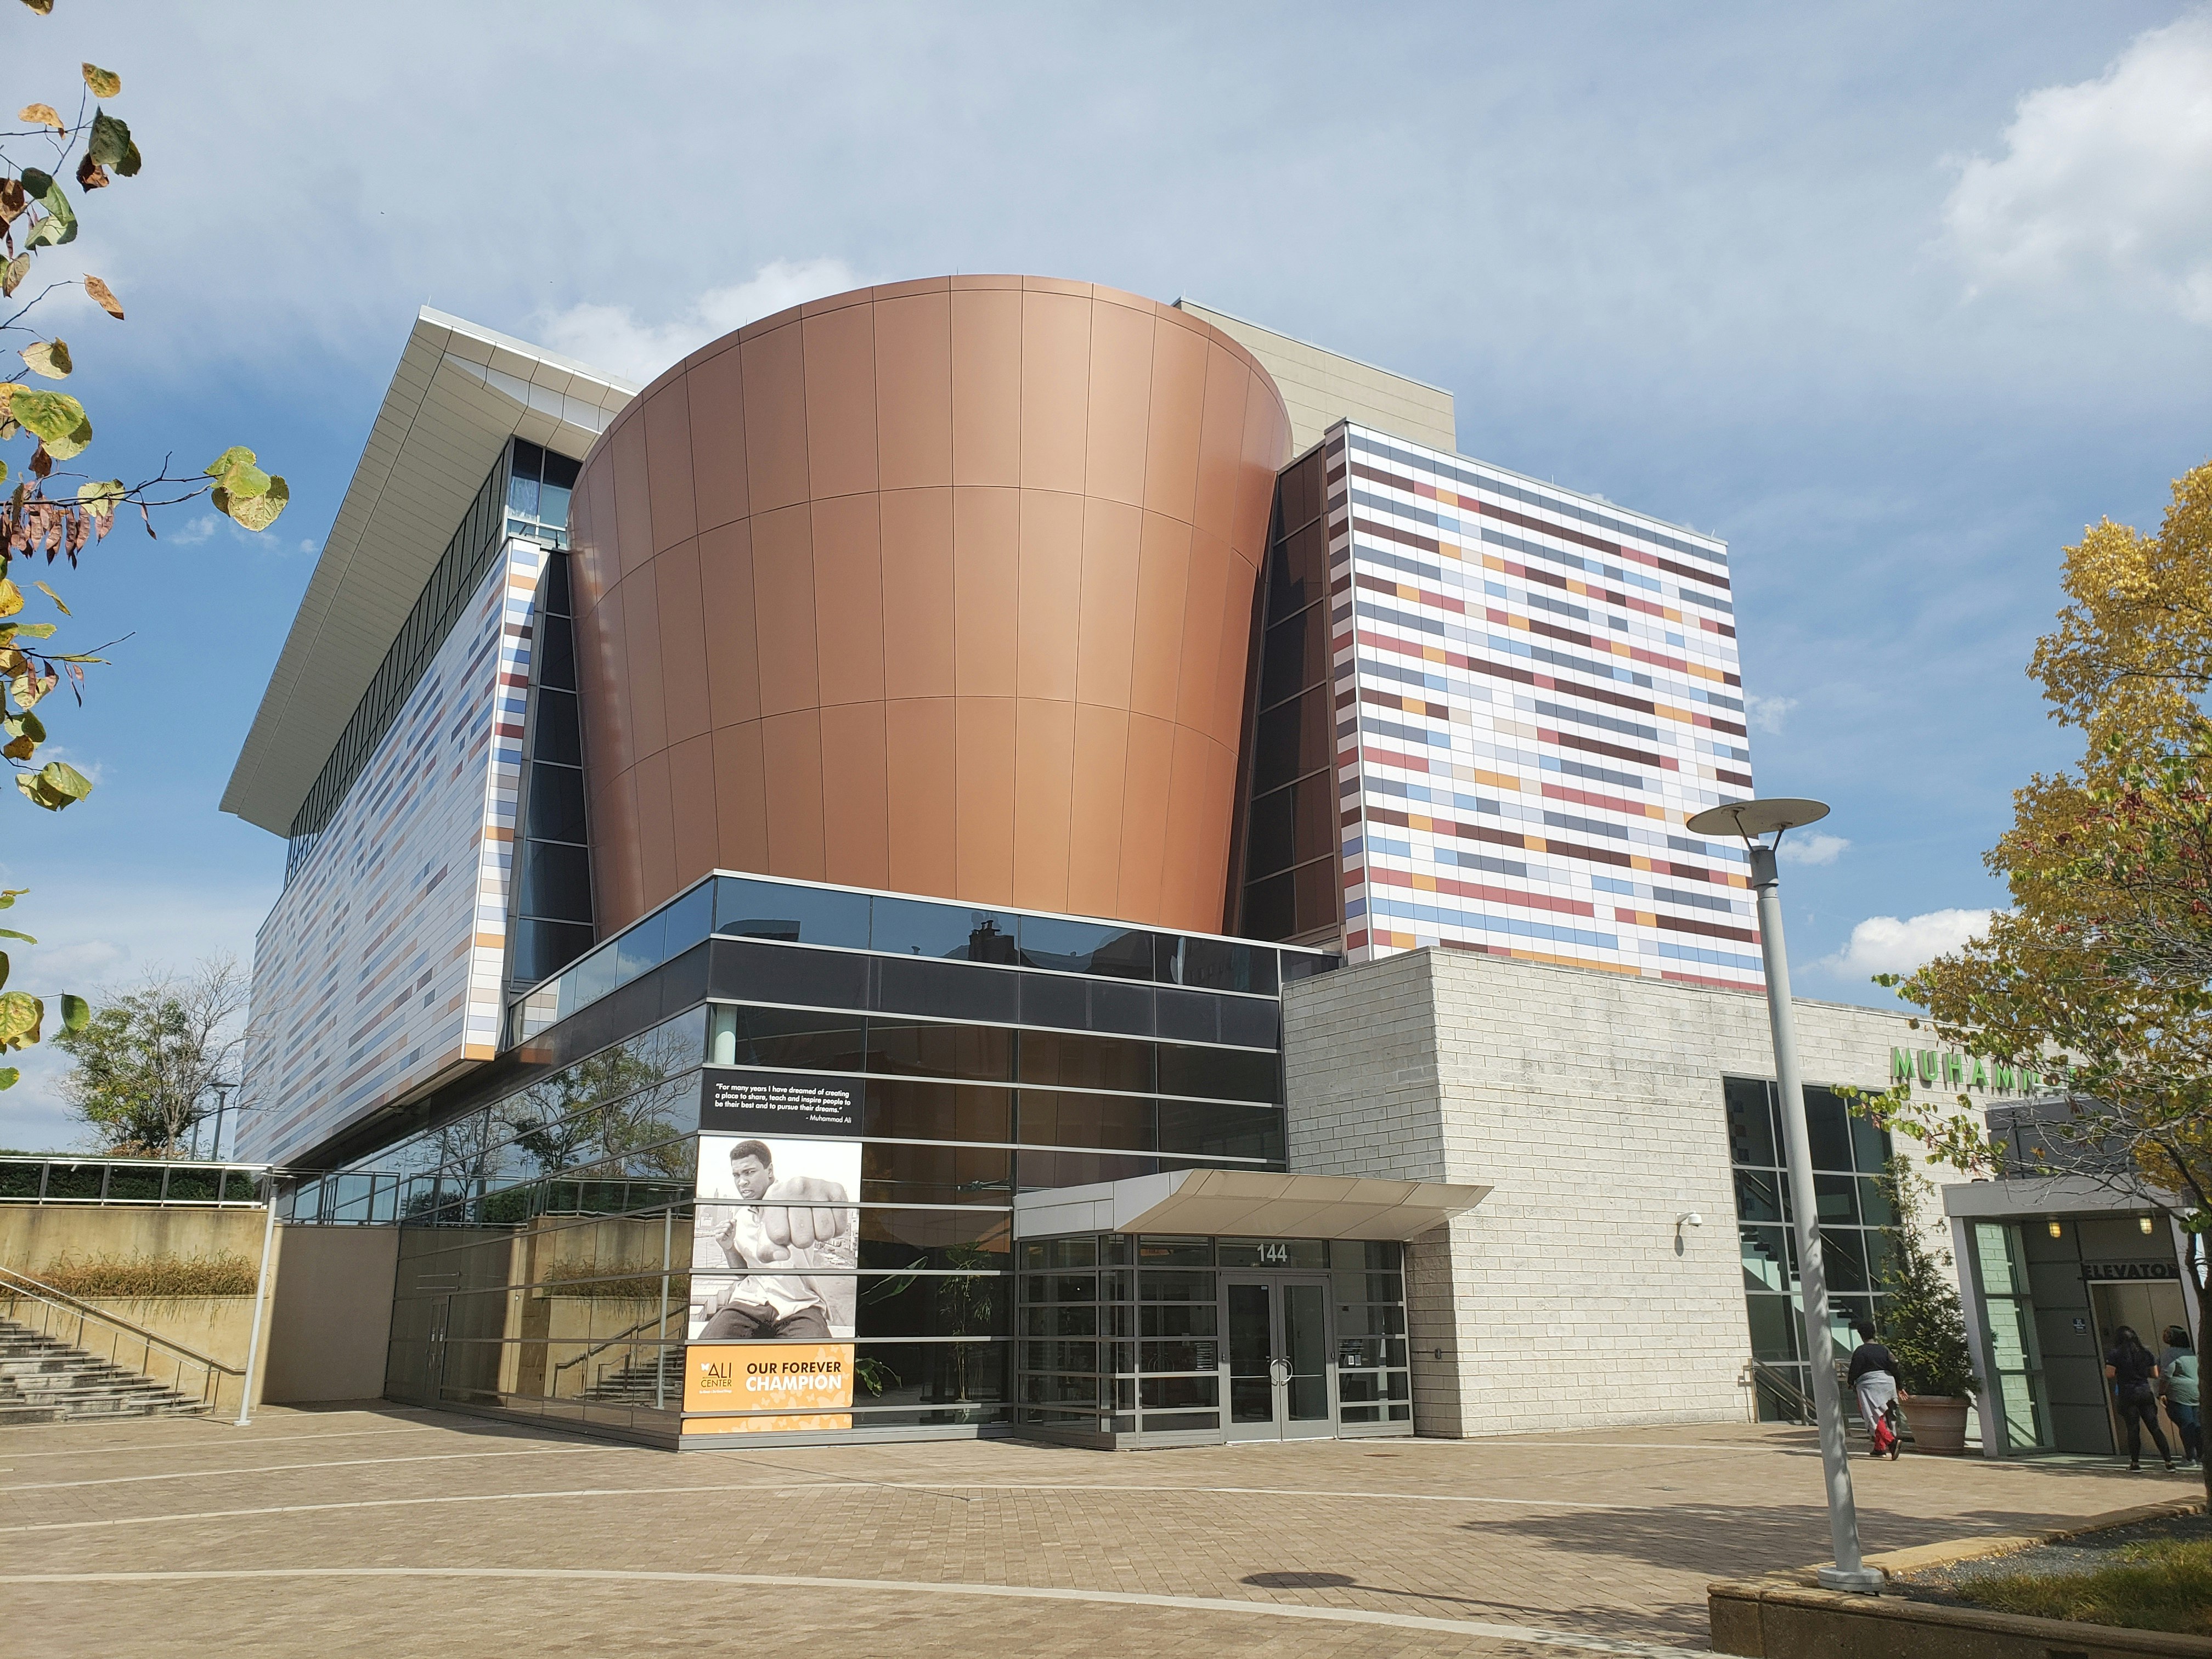 The exterior facade of the Muhammed Ali Center in Louisville, Kentucky is made up of several modernist forms, including a large bronze-colored curved tower over a rectangular glass lobby, surrounded by rectangular walls with a muted blue, red, and orange pattern that looks almost pixelated  